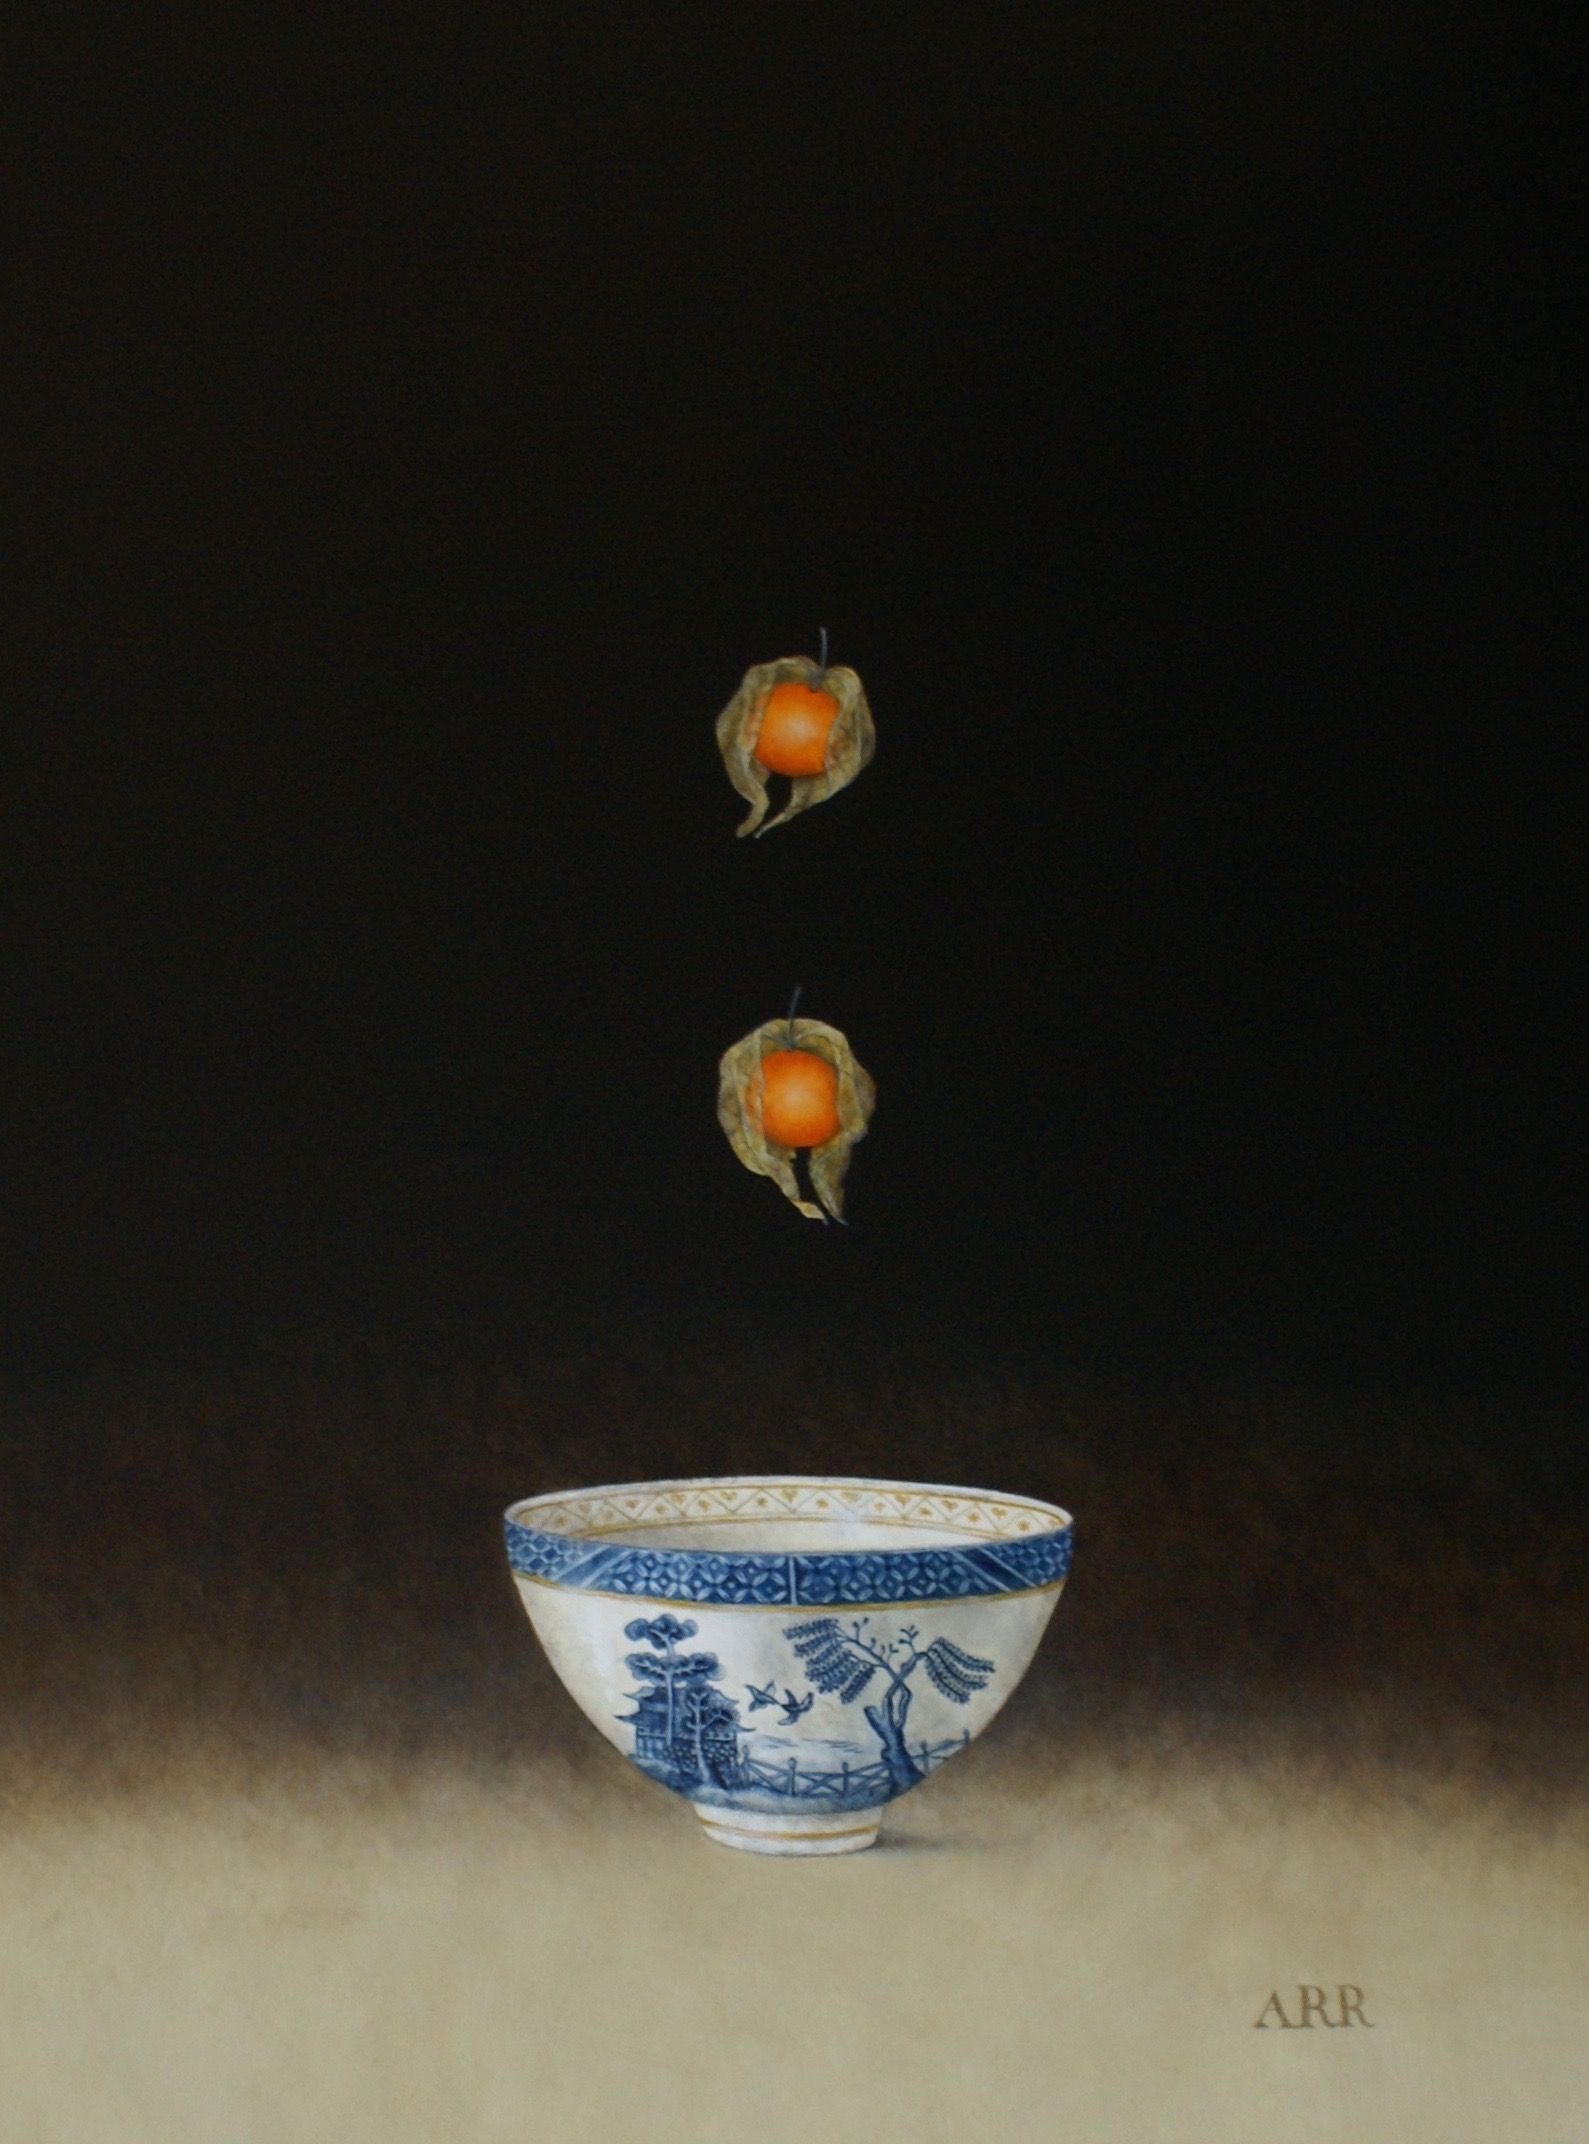 Willow Pattern Bowl with Falling Physalis by Alison Rankin